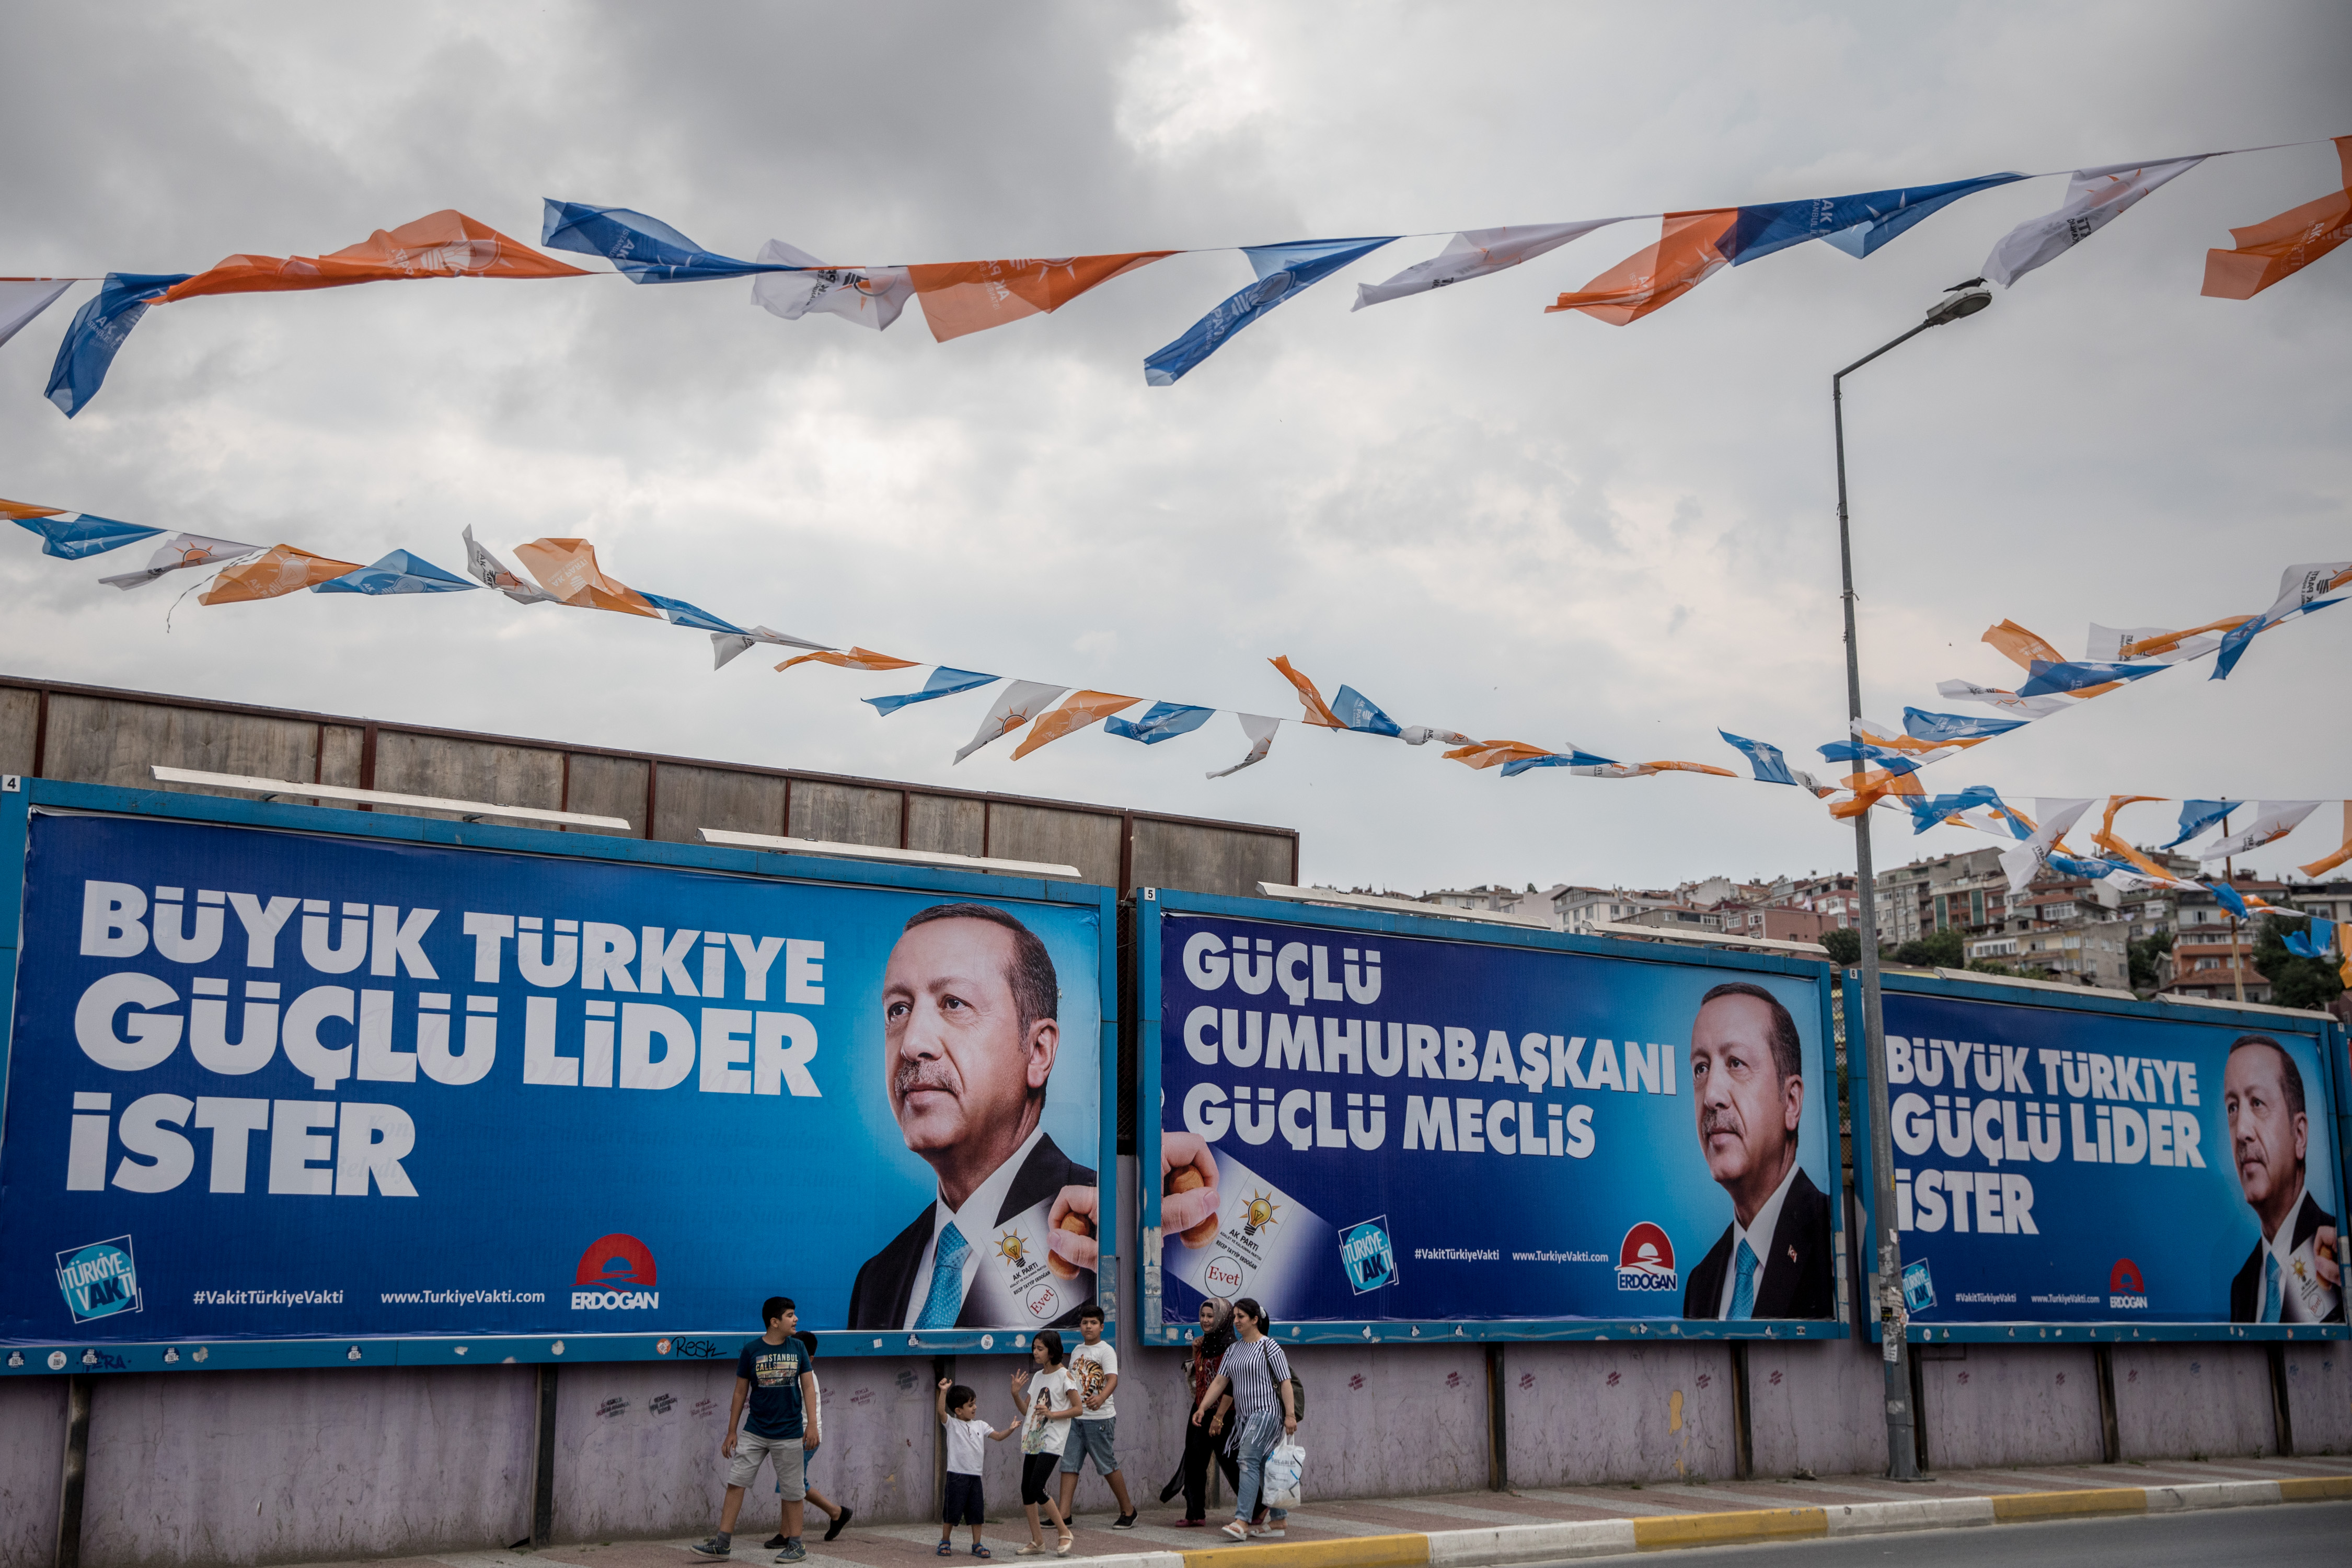 President Erdogan Campaigns In Istanbul Ahead Of Election